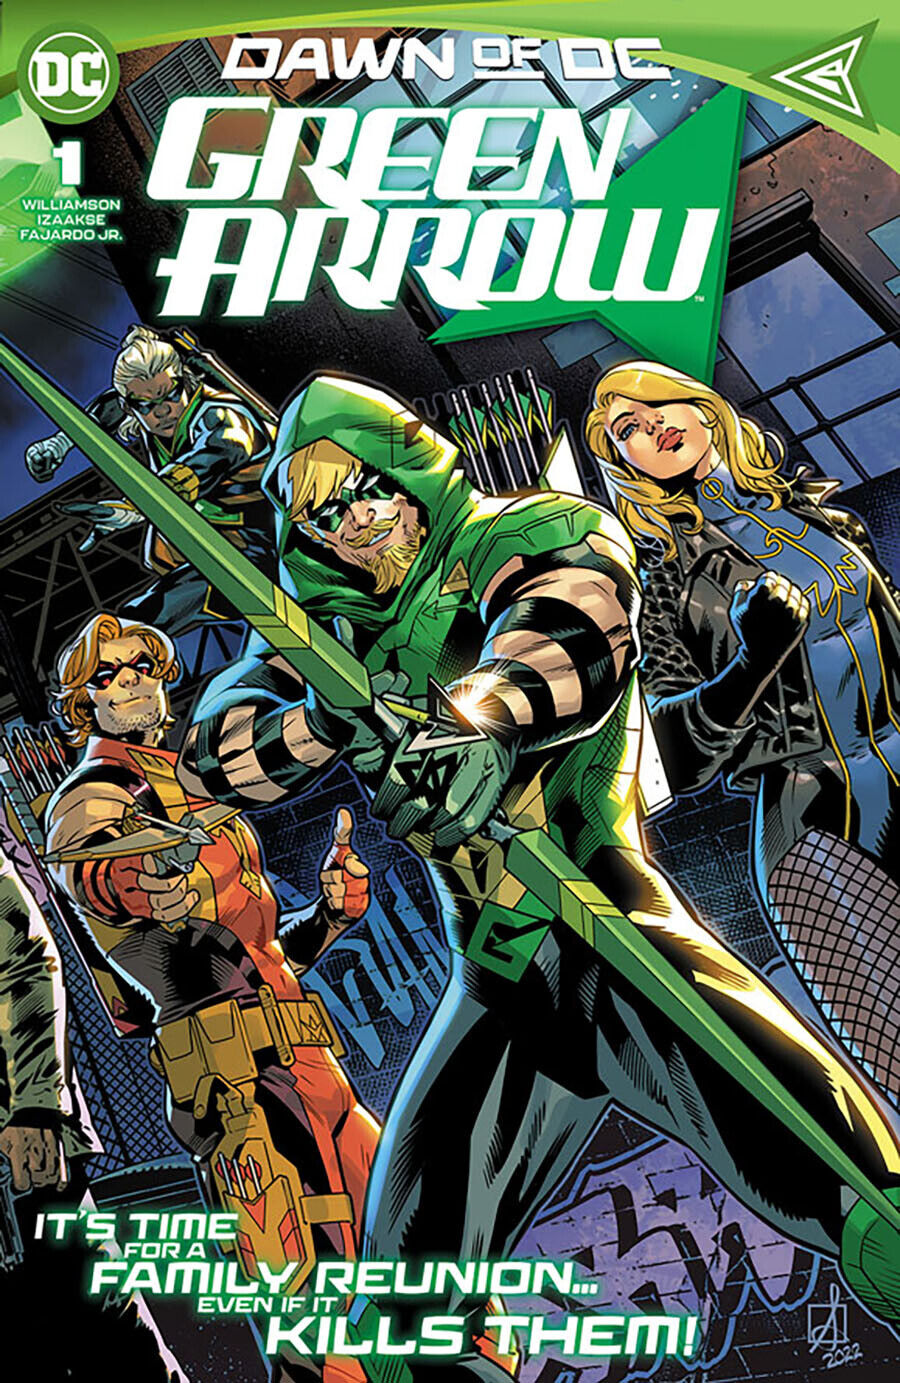 2023 GREEN ARROW LISTING (#9 10 11 AVAILABLE/YOU PICK/DAWN OF DC/BLACK CANARY)